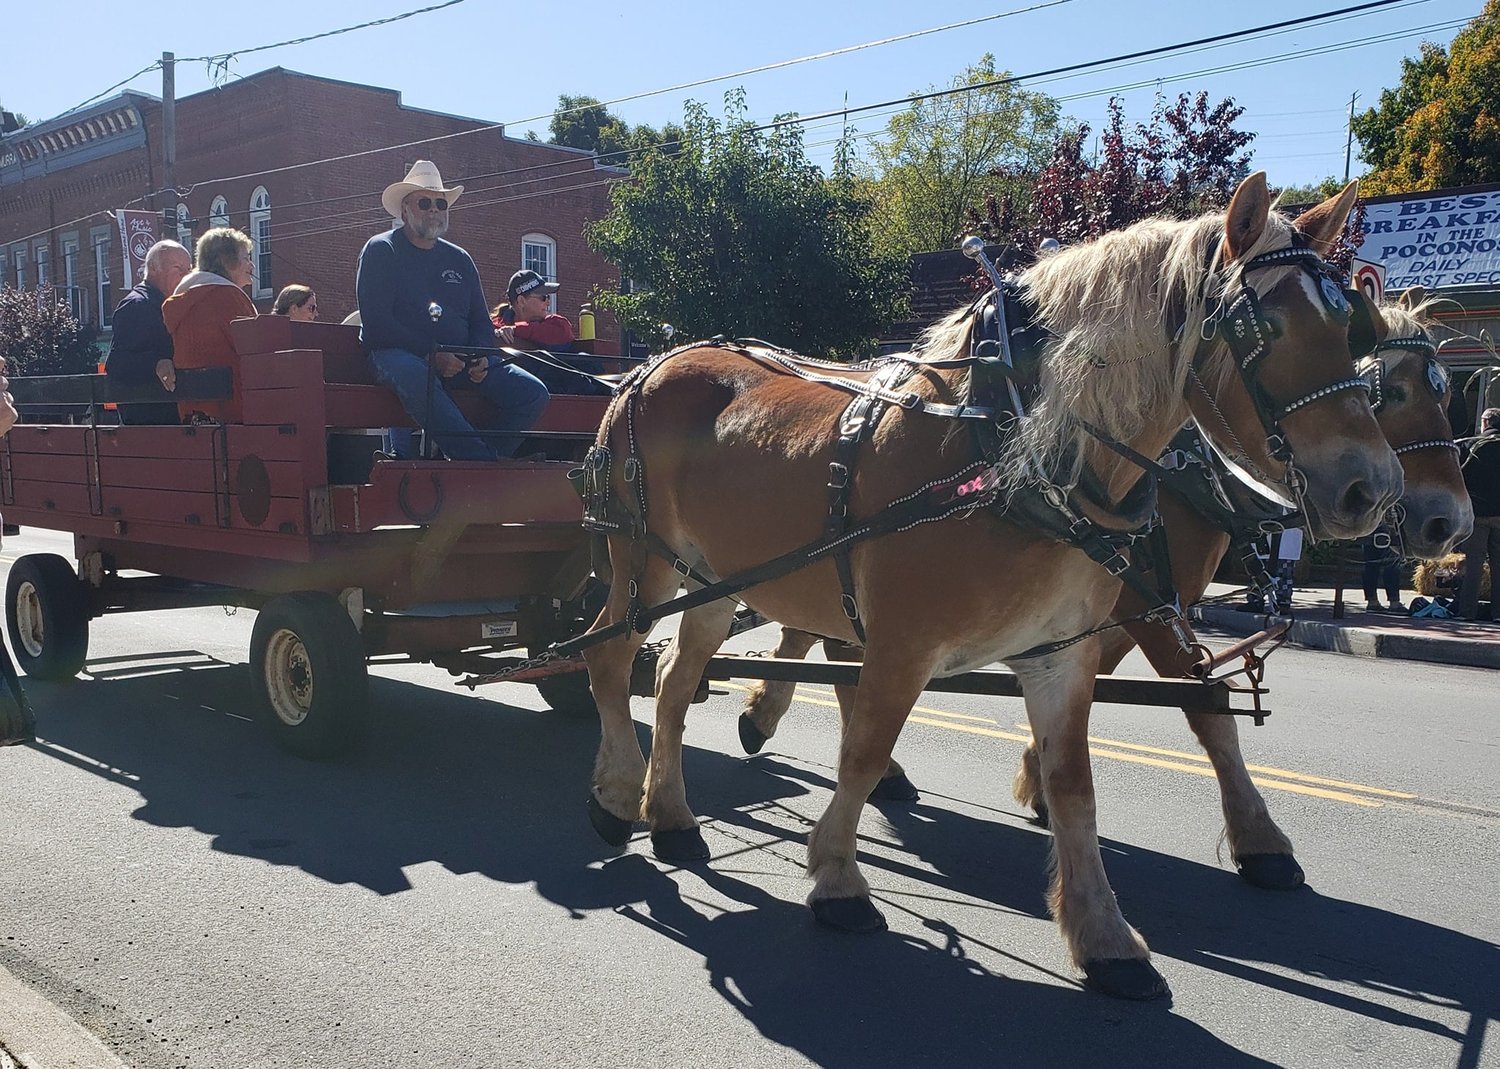 There will be horse-drawn wagon rides at the Hawley Harvest Hoedown.